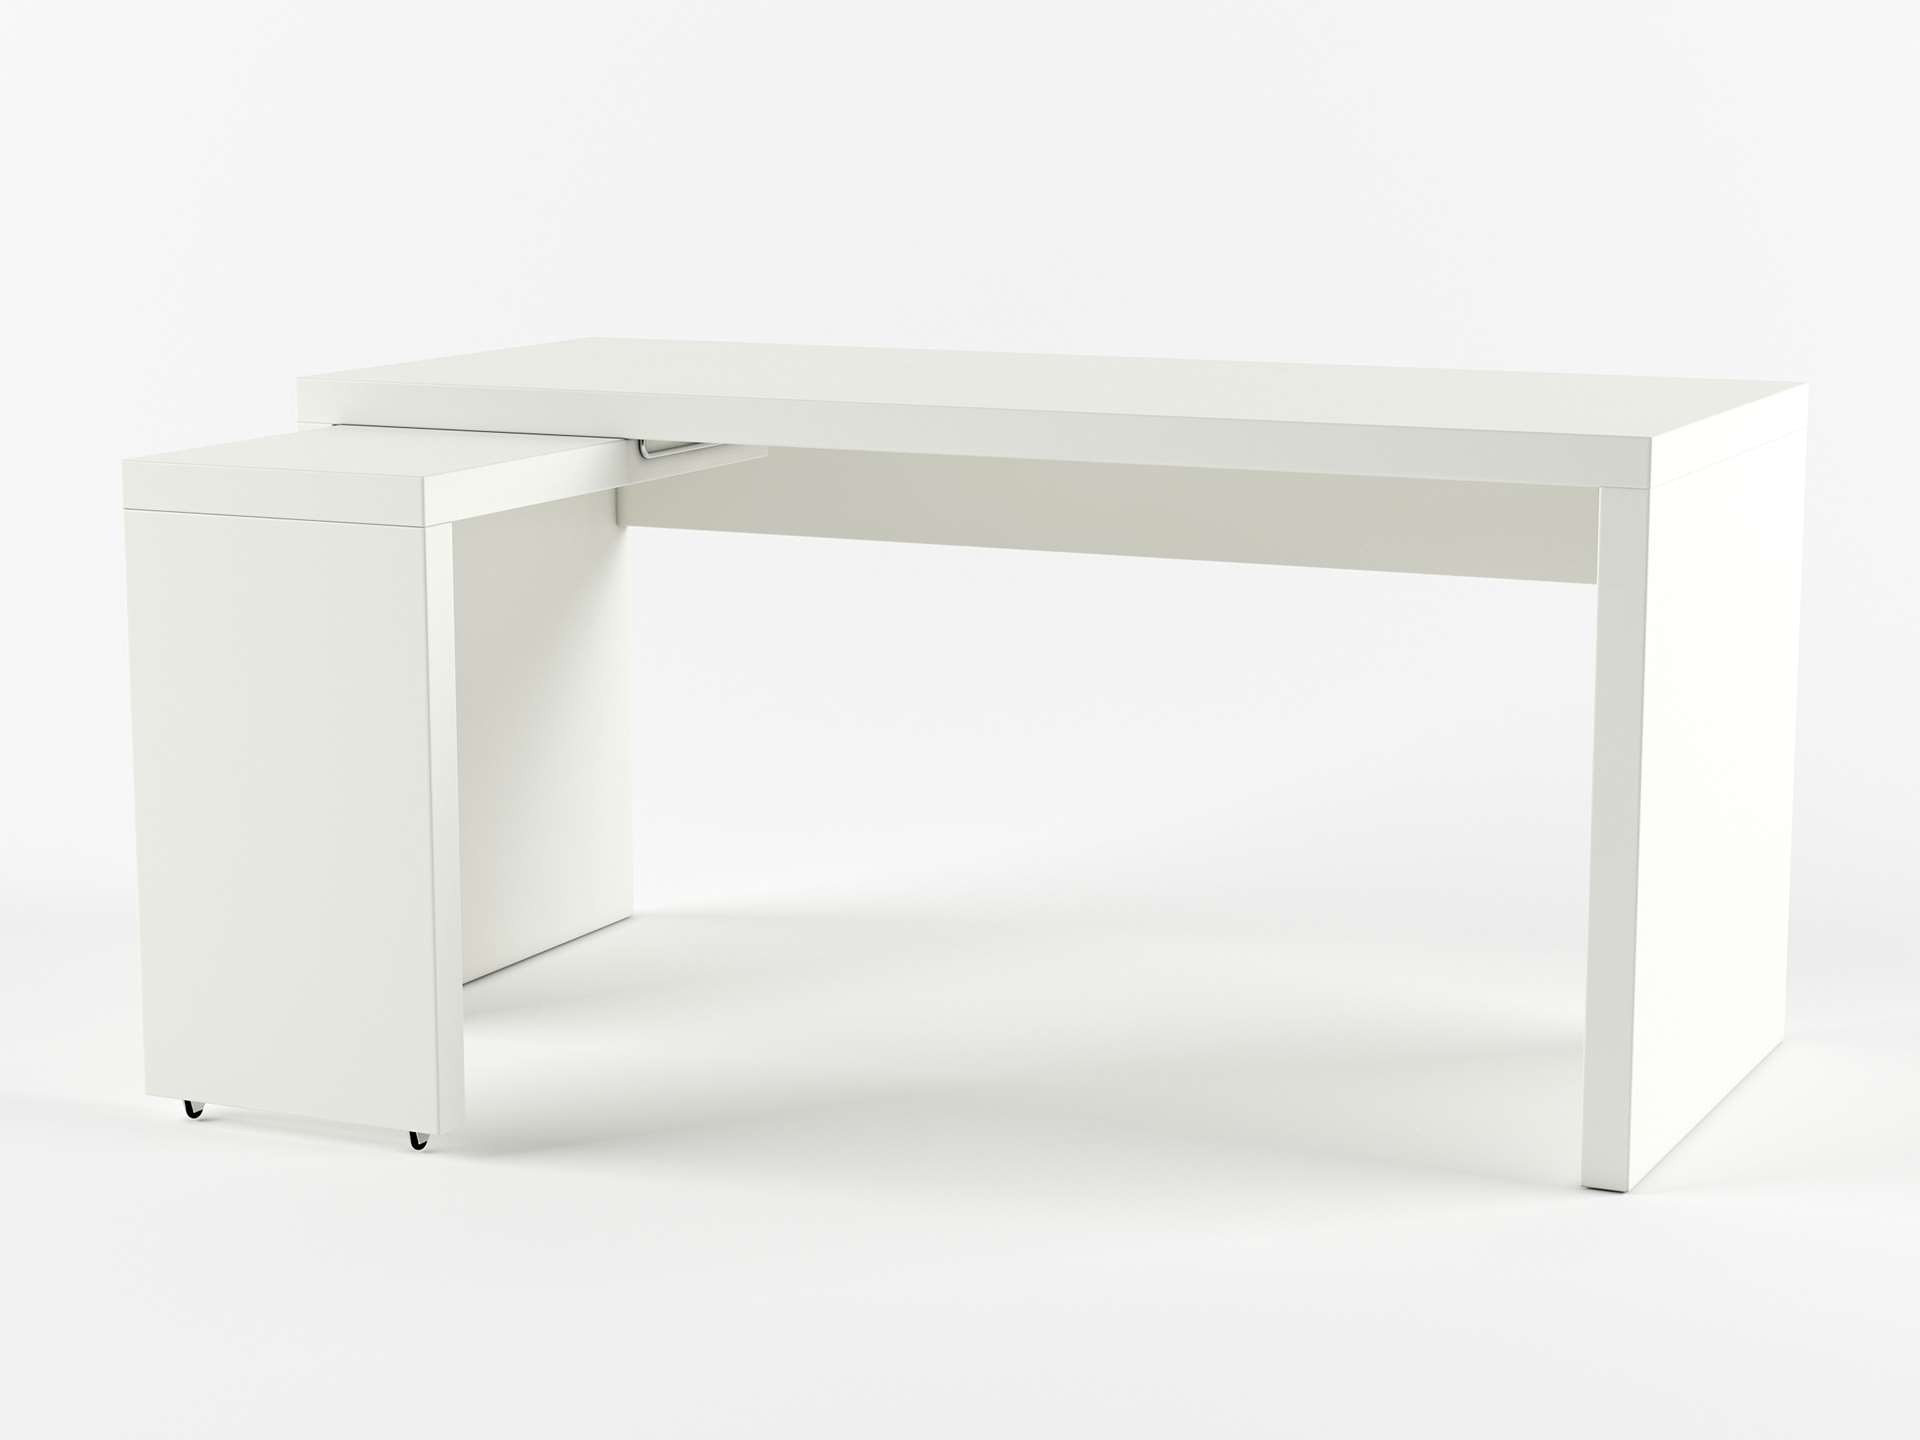 3d Malm Desk W Pull Out Panel Design Ikea Glancing Eye